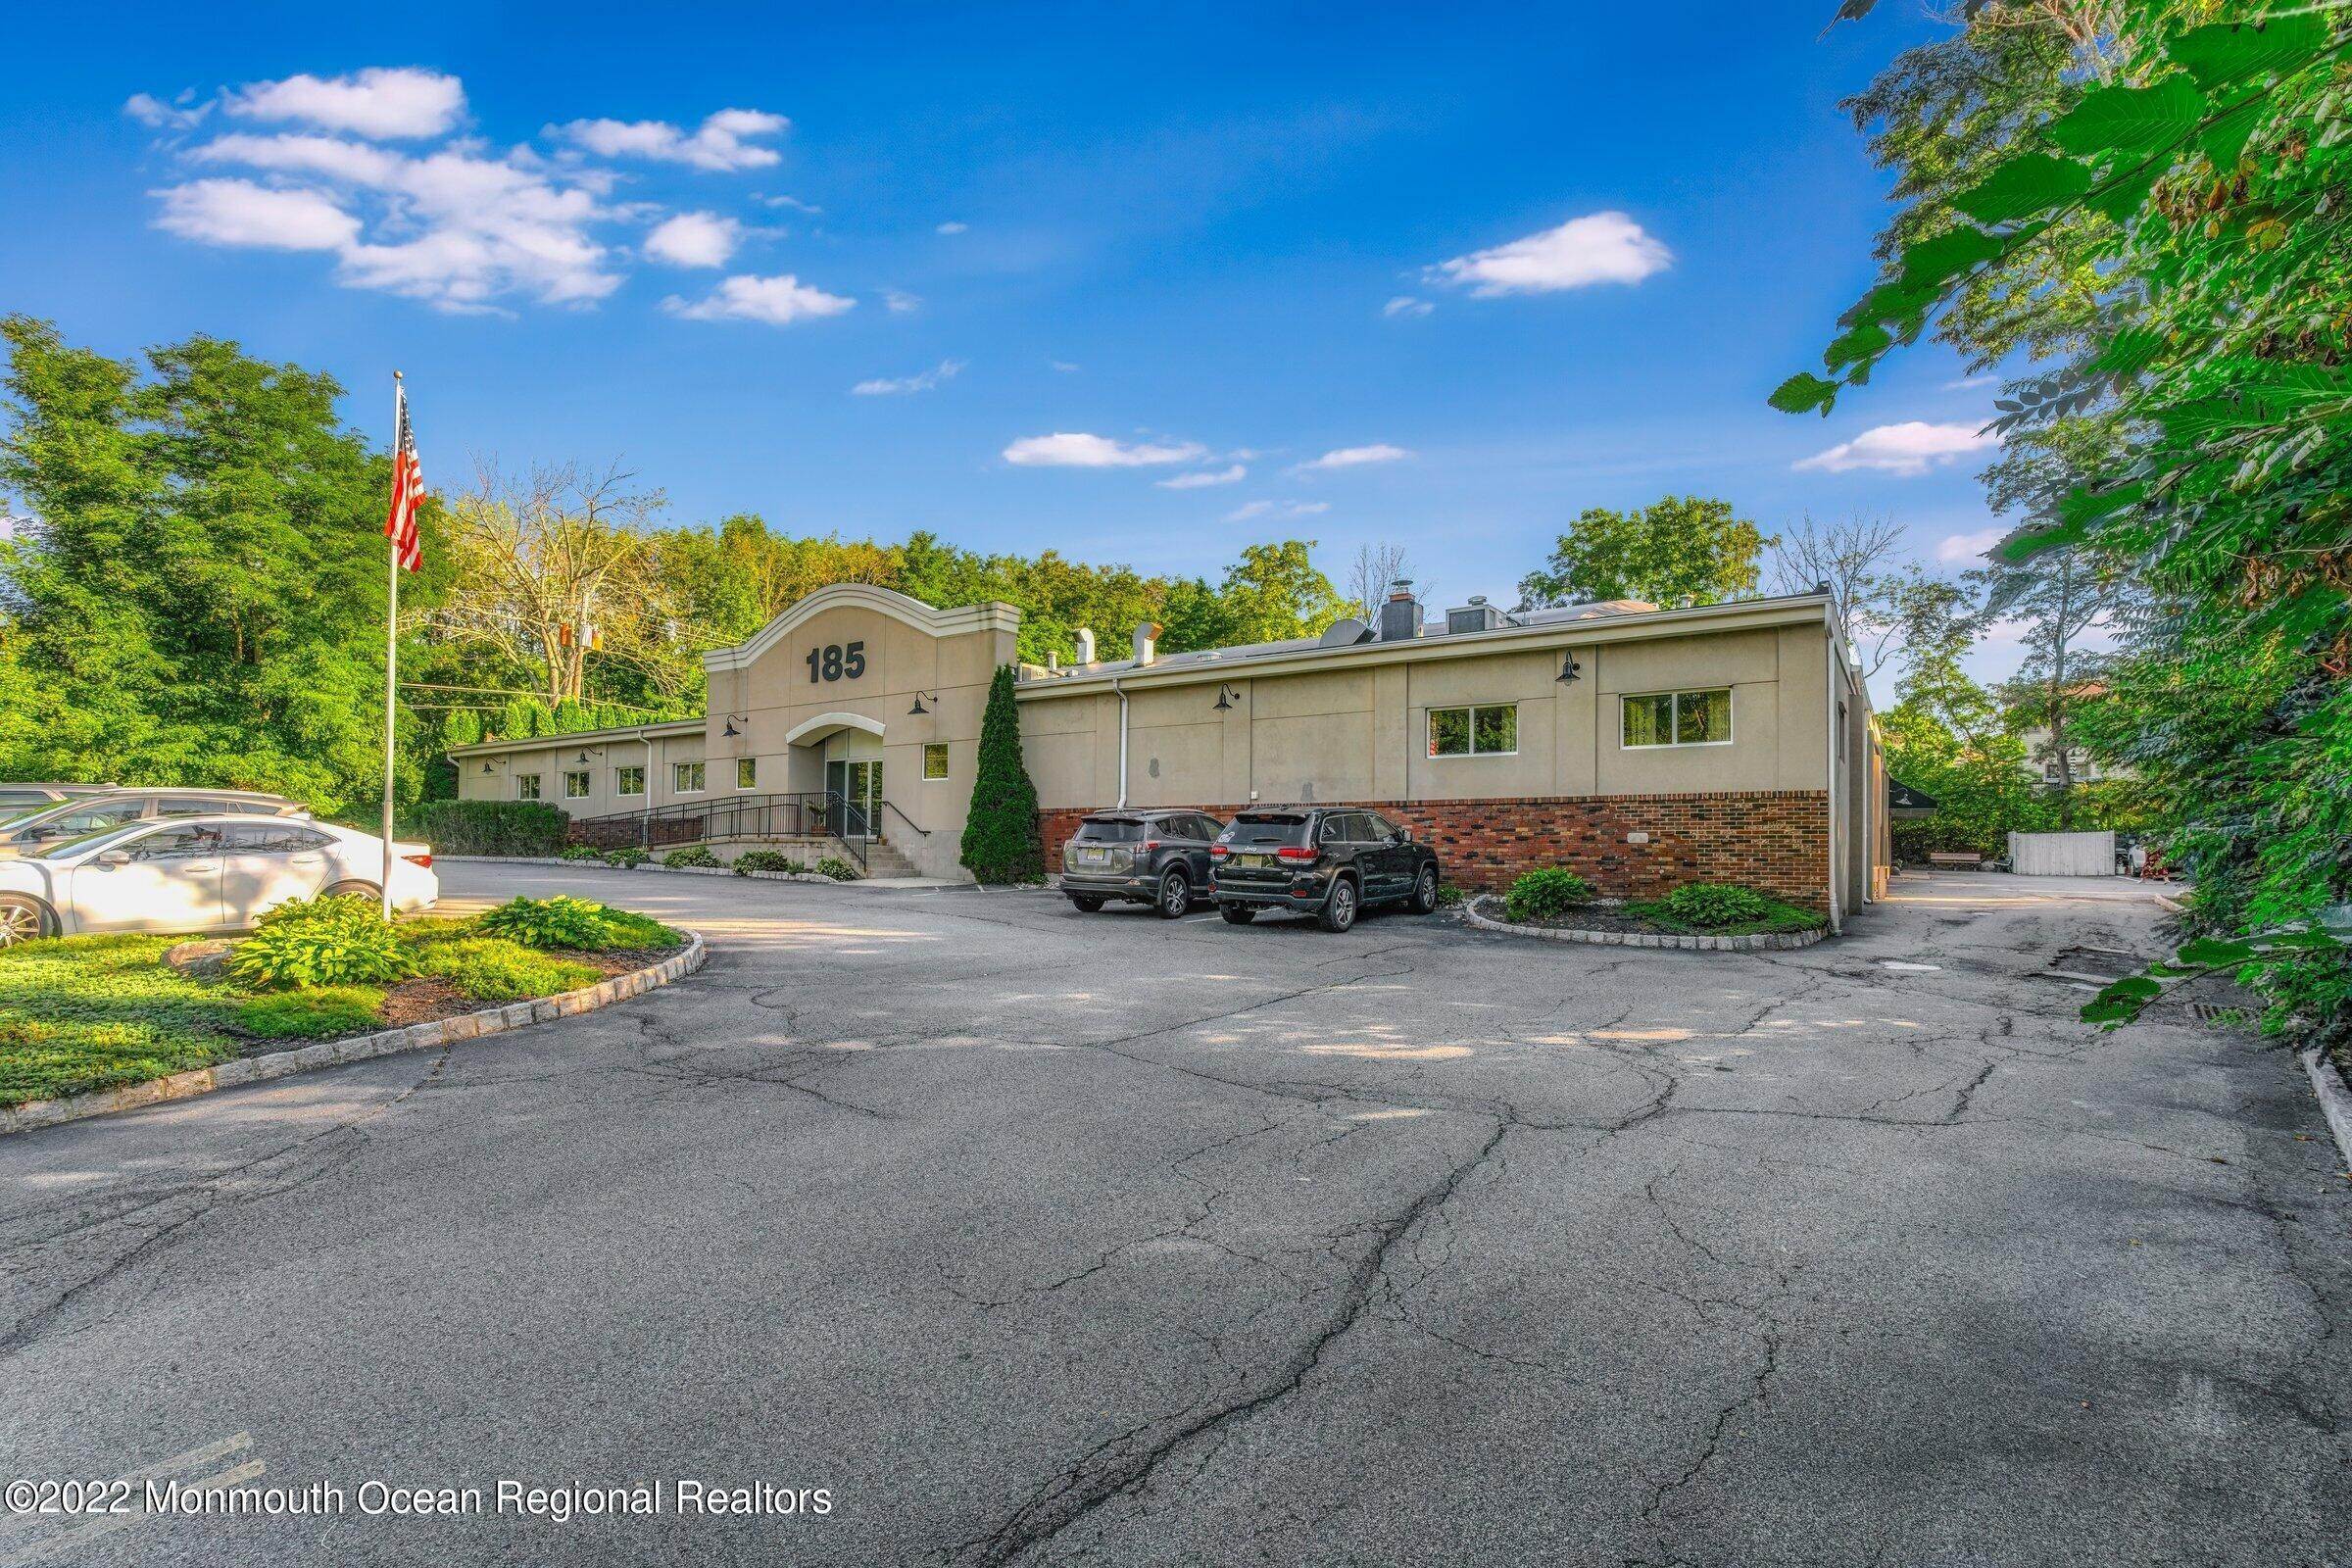 Commercial for Sale at 185 State Route 183 Stanhope, New Jersey 07874 United States